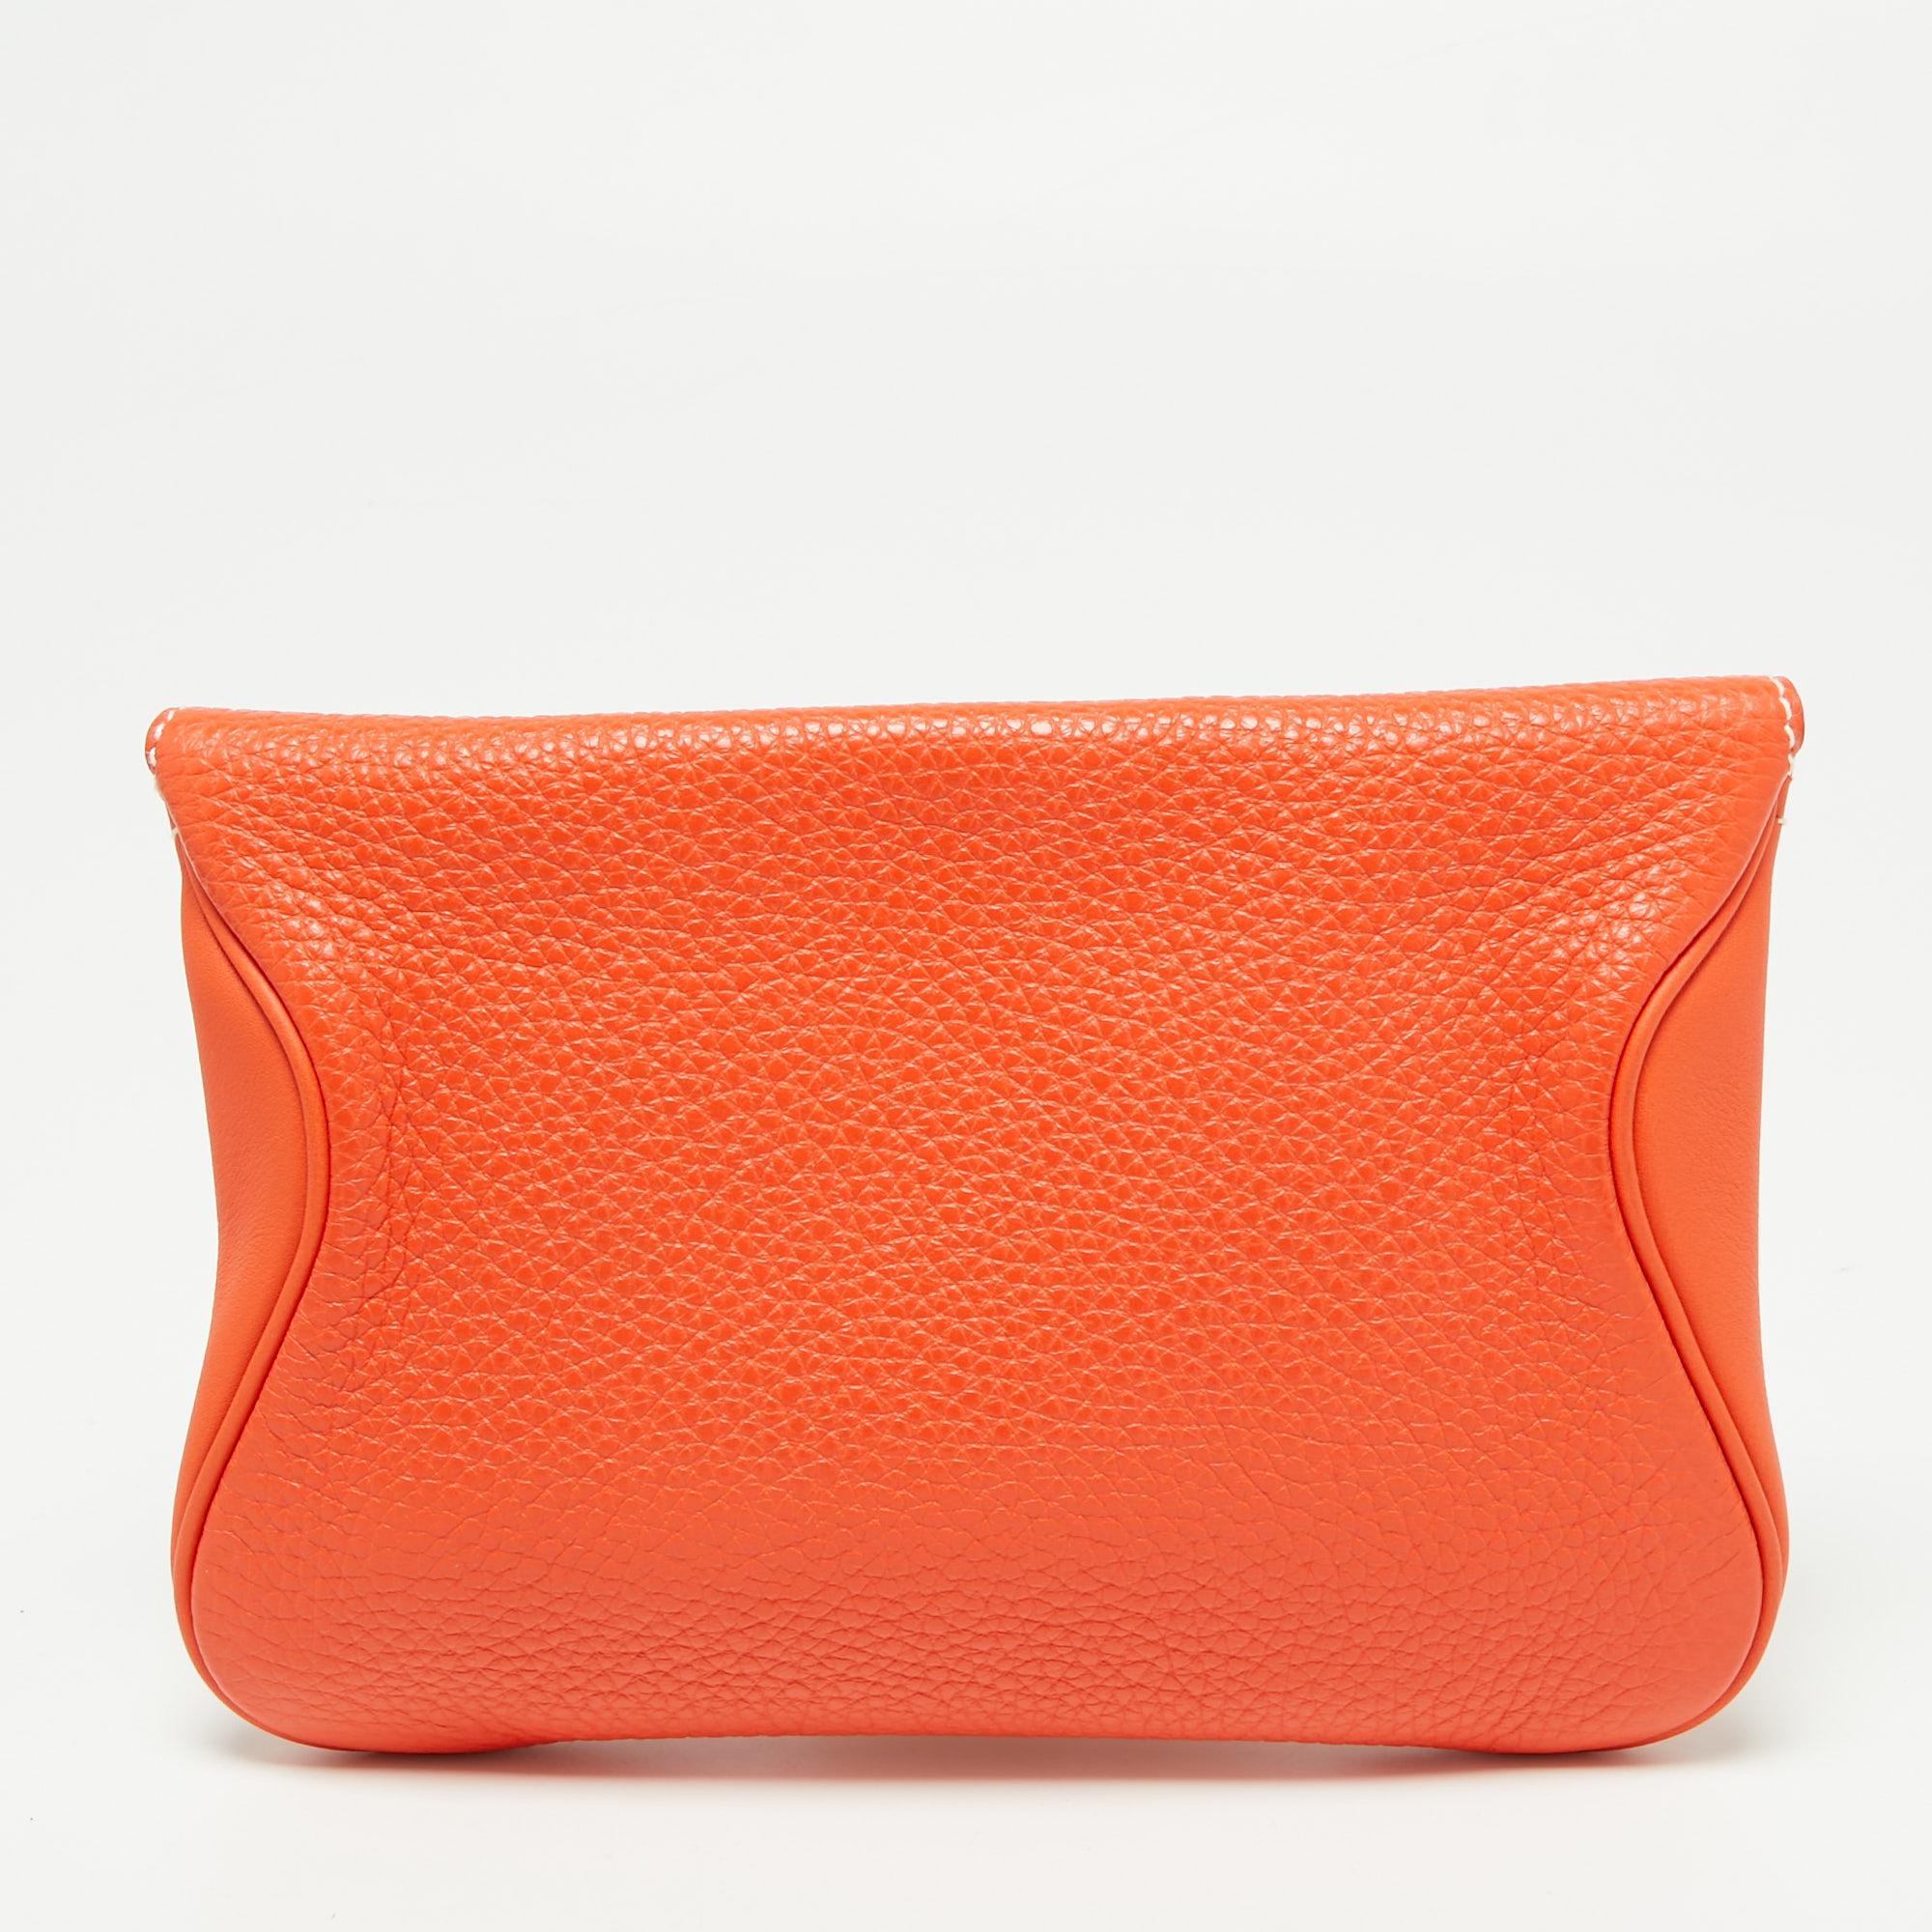 This Hermes clutch is utterly vibrant in its orange hue and is carefully crafted from exquisite leather to offer you a summer accessory you will cherish. It is defined by high quality and an enduring appeal. Flaunt the pretty clutch with sundresses